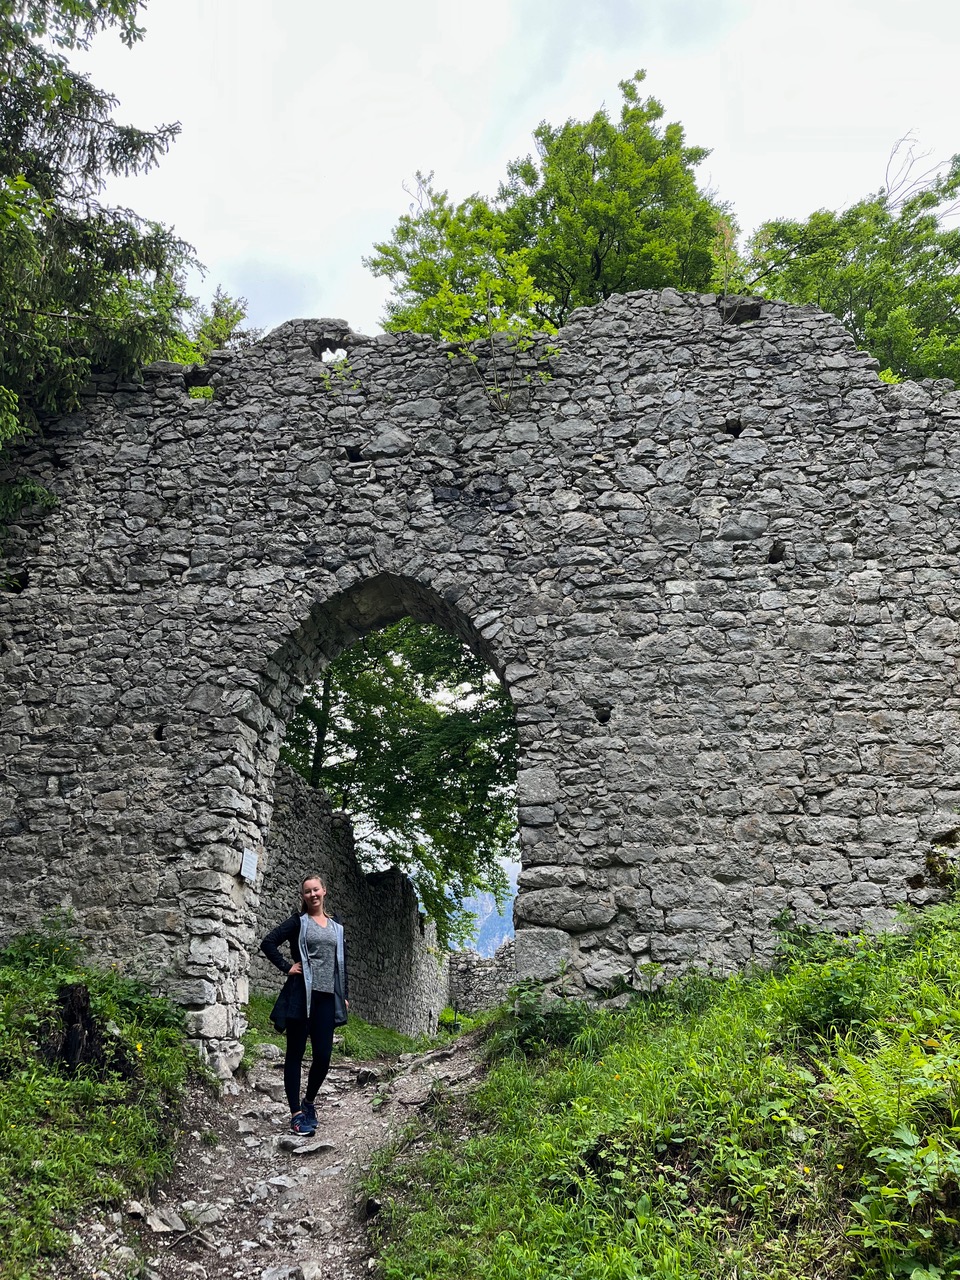 The arched entrance to Werdenfels Castle ruins